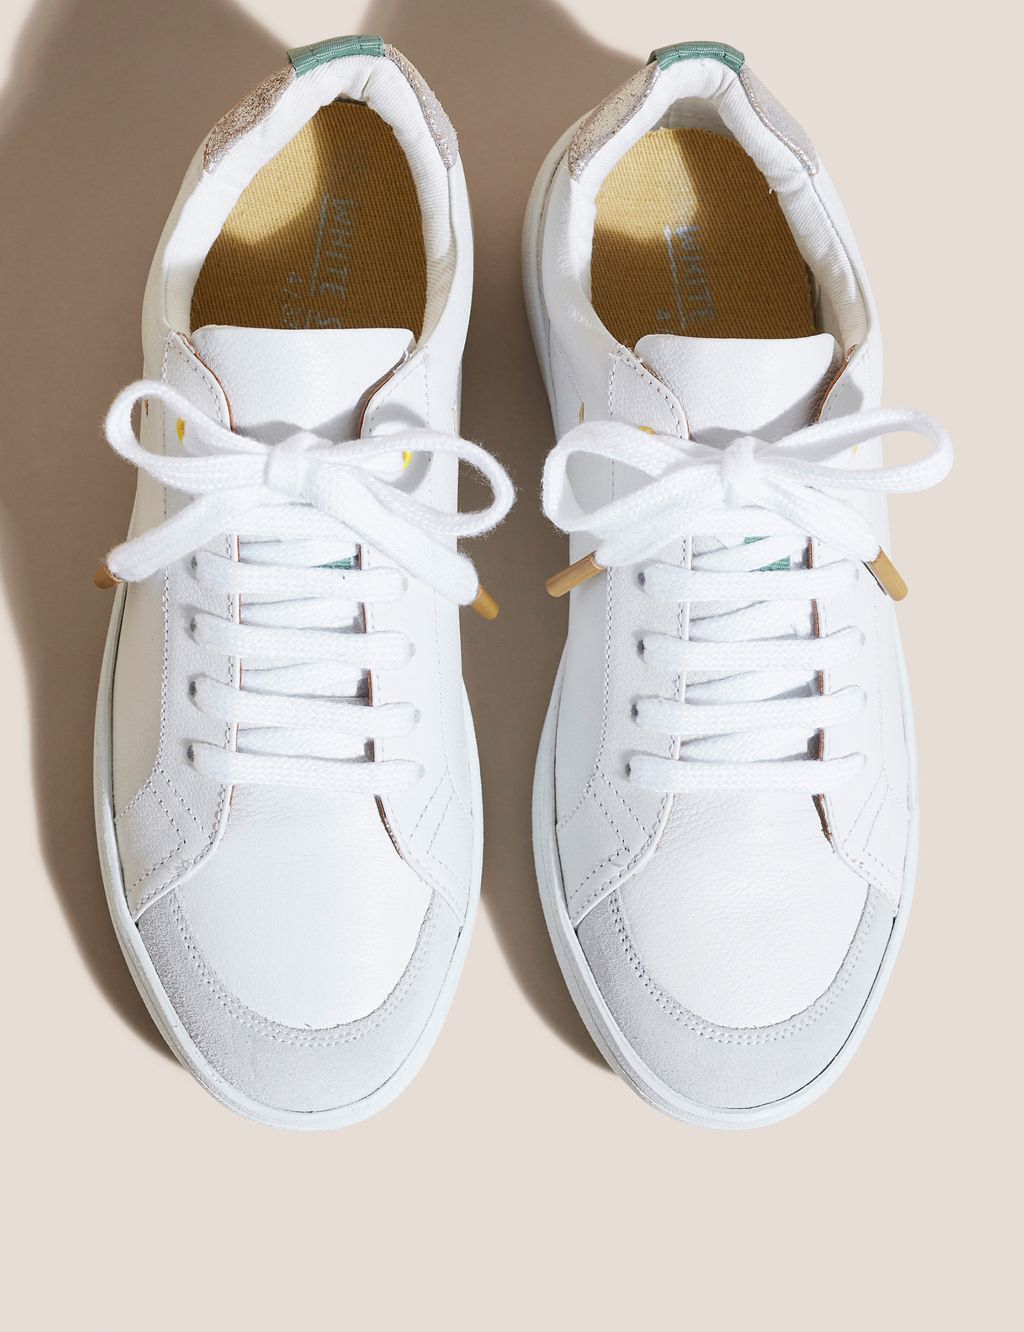 Leather Lace Up Trainers image 3